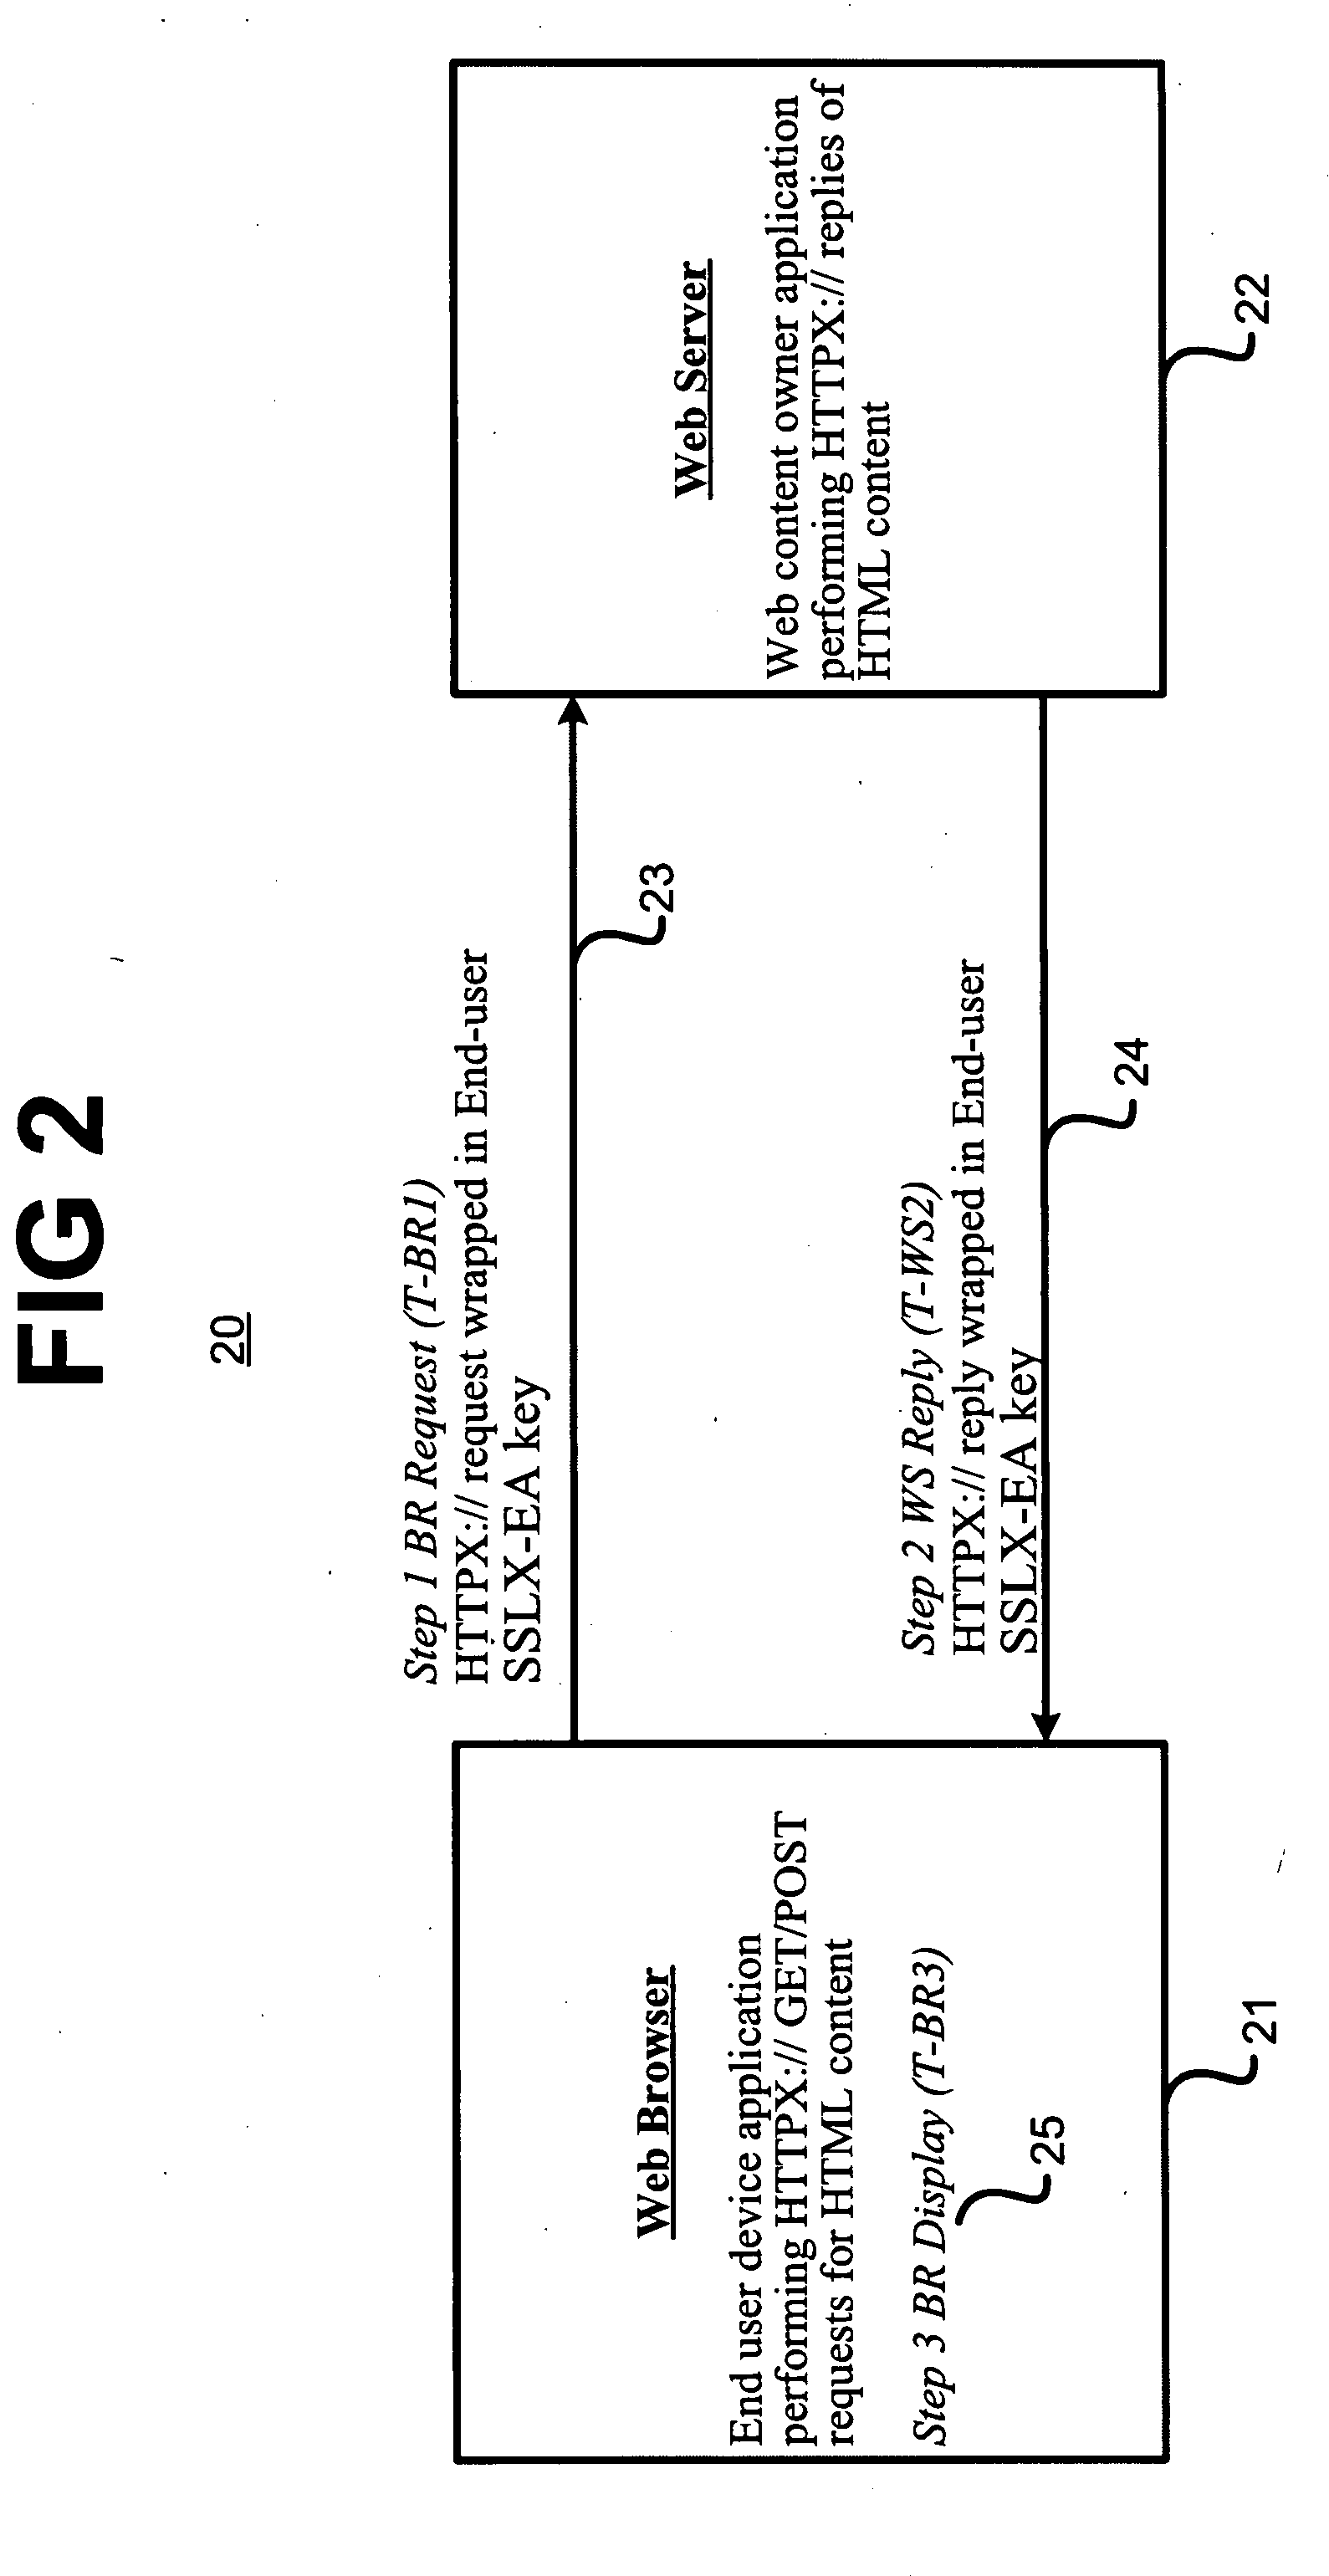 Method and system for establishing real-time authenticated and secured communications channels in a public network